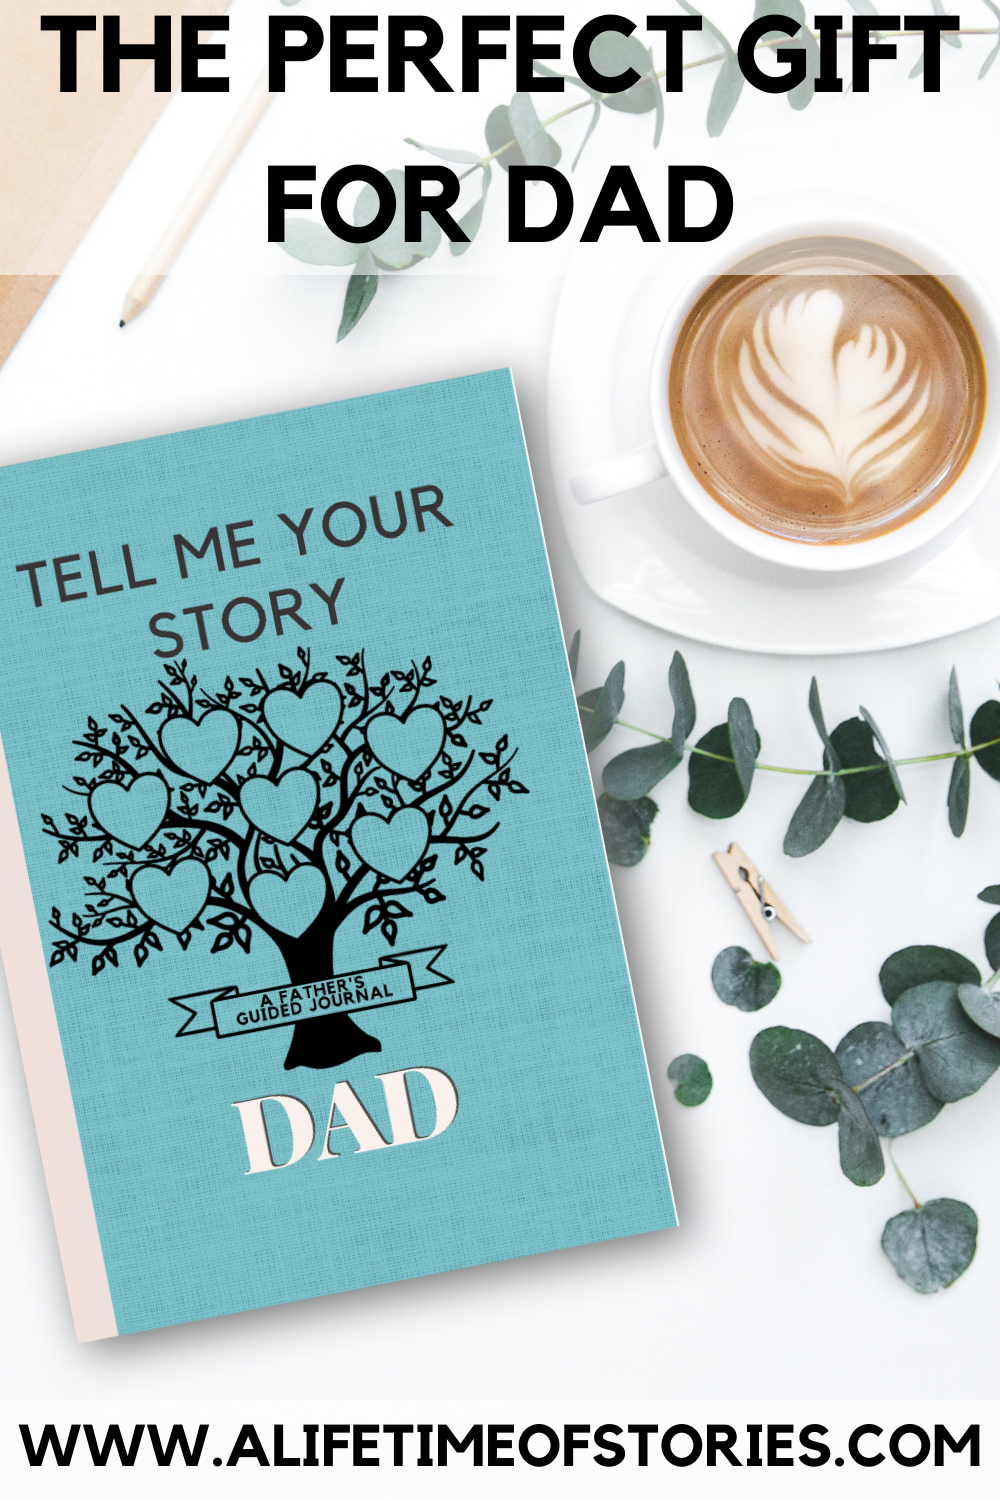 The perfect gift for dad text with tell me your story journal cover on light background